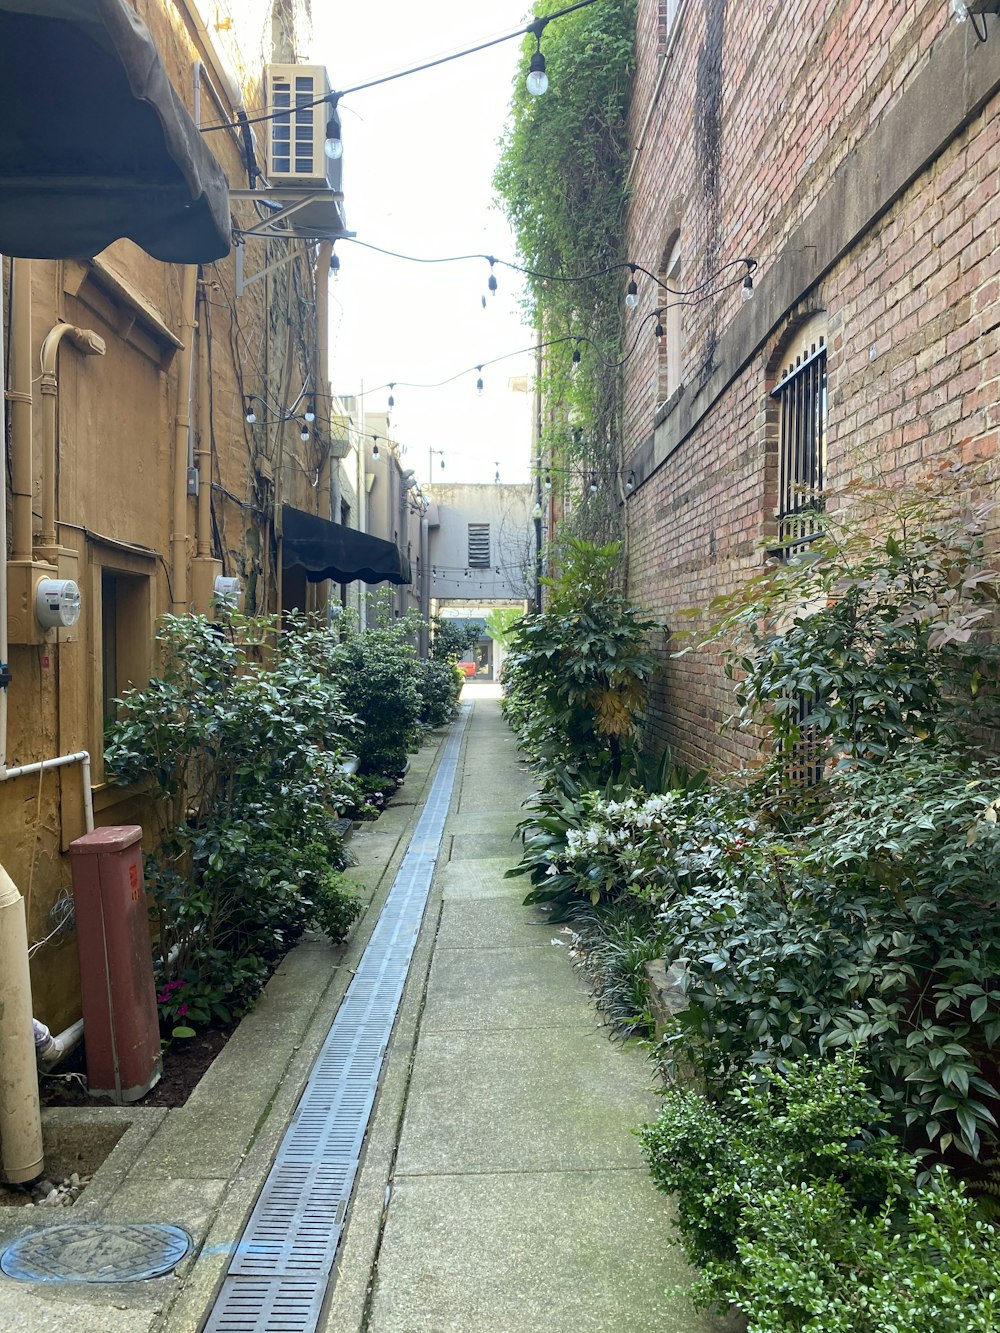 a narrow alley way with plants growing on both sides